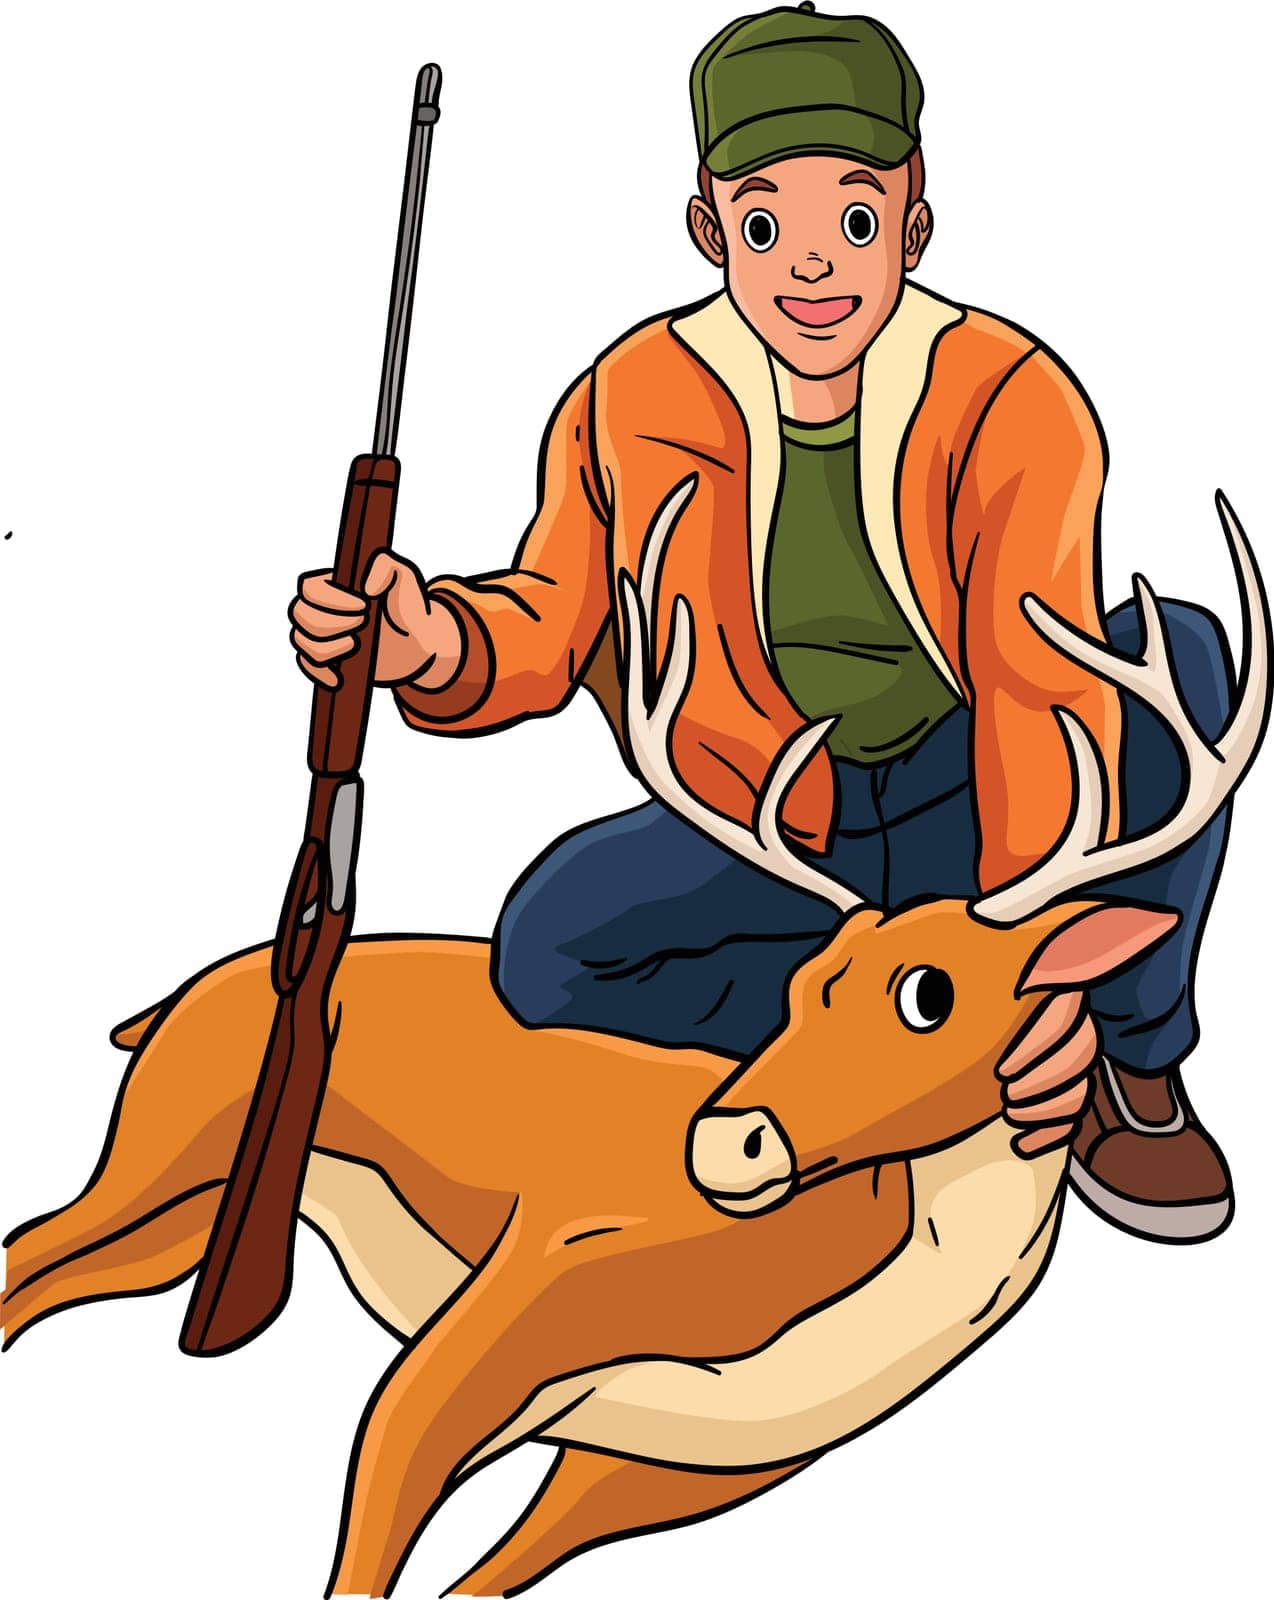 This cartoon clipart shows a Deer Hunting illustration.